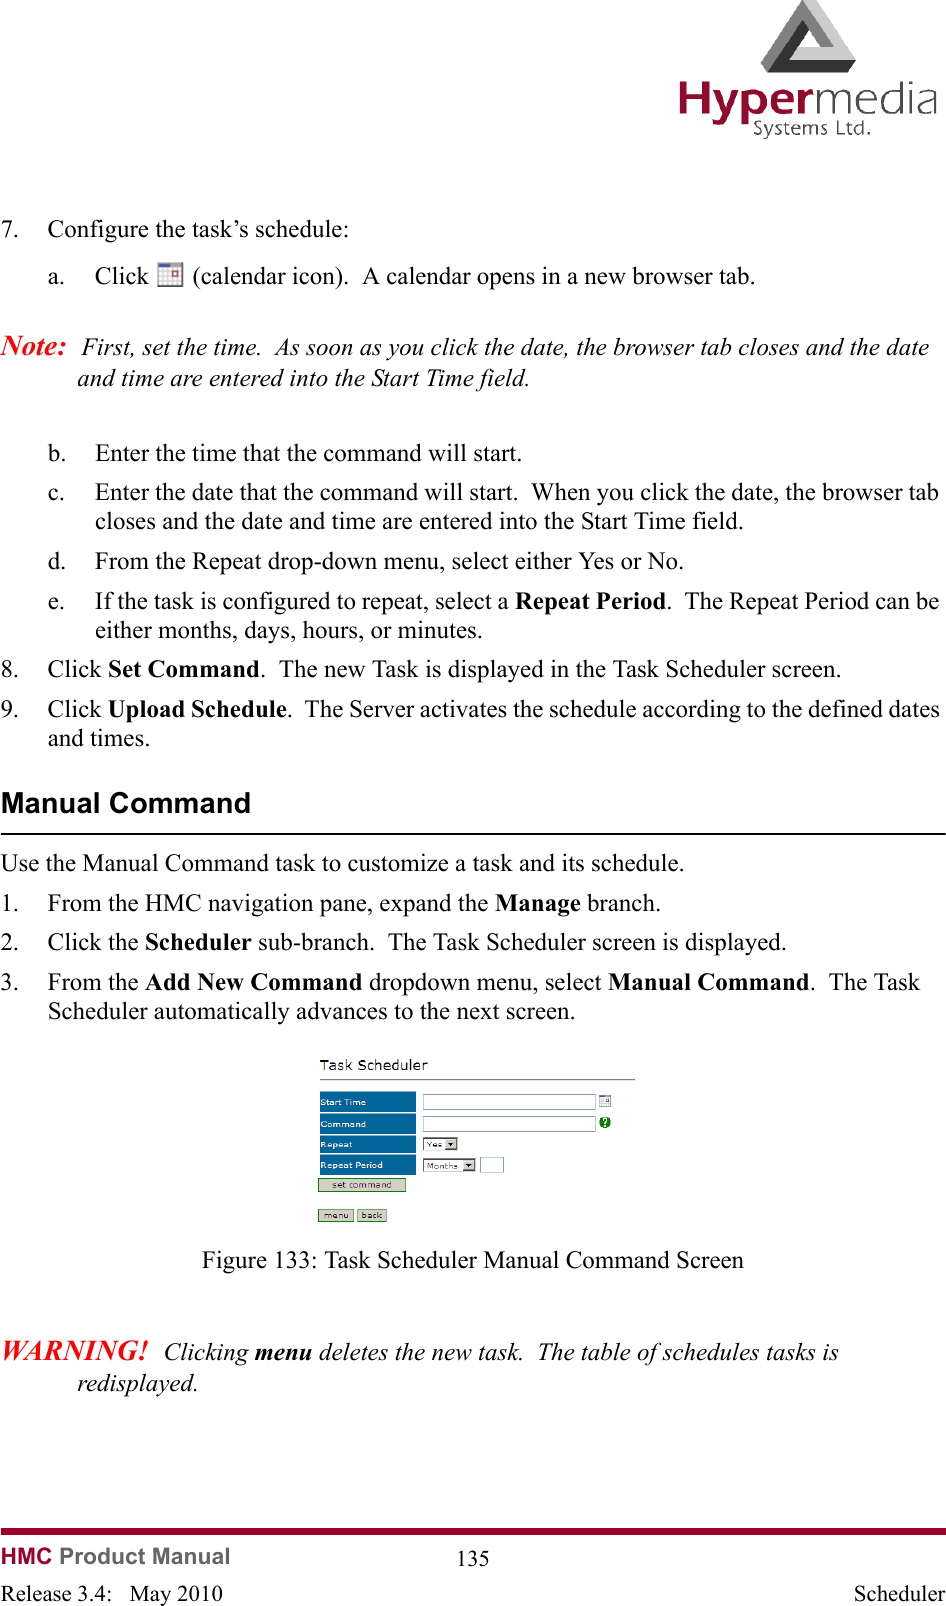 HMC Product Manual  135Release 3.4:   May 2010 Scheduler7. Configure the task’s schedule:a. Click   (calendar icon).  A calendar opens in a new browser tab.Note:  First, set the time.  As soon as you click the date, the browser tab closes and the date and time are entered into the Start Time field.b. Enter the time that the command will start.c. Enter the date that the command will start.  When you click the date, the browser tab closes and the date and time are entered into the Start Time field.d. From the Repeat drop-down menu, select either Yes or No.e. If the task is configured to repeat, select a Repeat Period.  The Repeat Period can be either months, days, hours, or minutes.8. Click Set Command.  The new Task is displayed in the Task Scheduler screen.9. Click Upload Schedule.  The Server activates the schedule according to the defined dates and times.Manual CommandUse the Manual Command task to customize a task and its schedule.1. From the HMC navigation pane, expand the Manage branch.2. Click the Scheduler sub-branch.  The Task Scheduler screen is displayed.3. From the Add New Command dropdown menu, select Manual Command.  The Task Scheduler automatically advances to the next screen.              Figure 133: Task Scheduler Manual Command ScreenWARNING!  Clicking menu deletes the new task.  The table of schedules tasks is redisplayed.